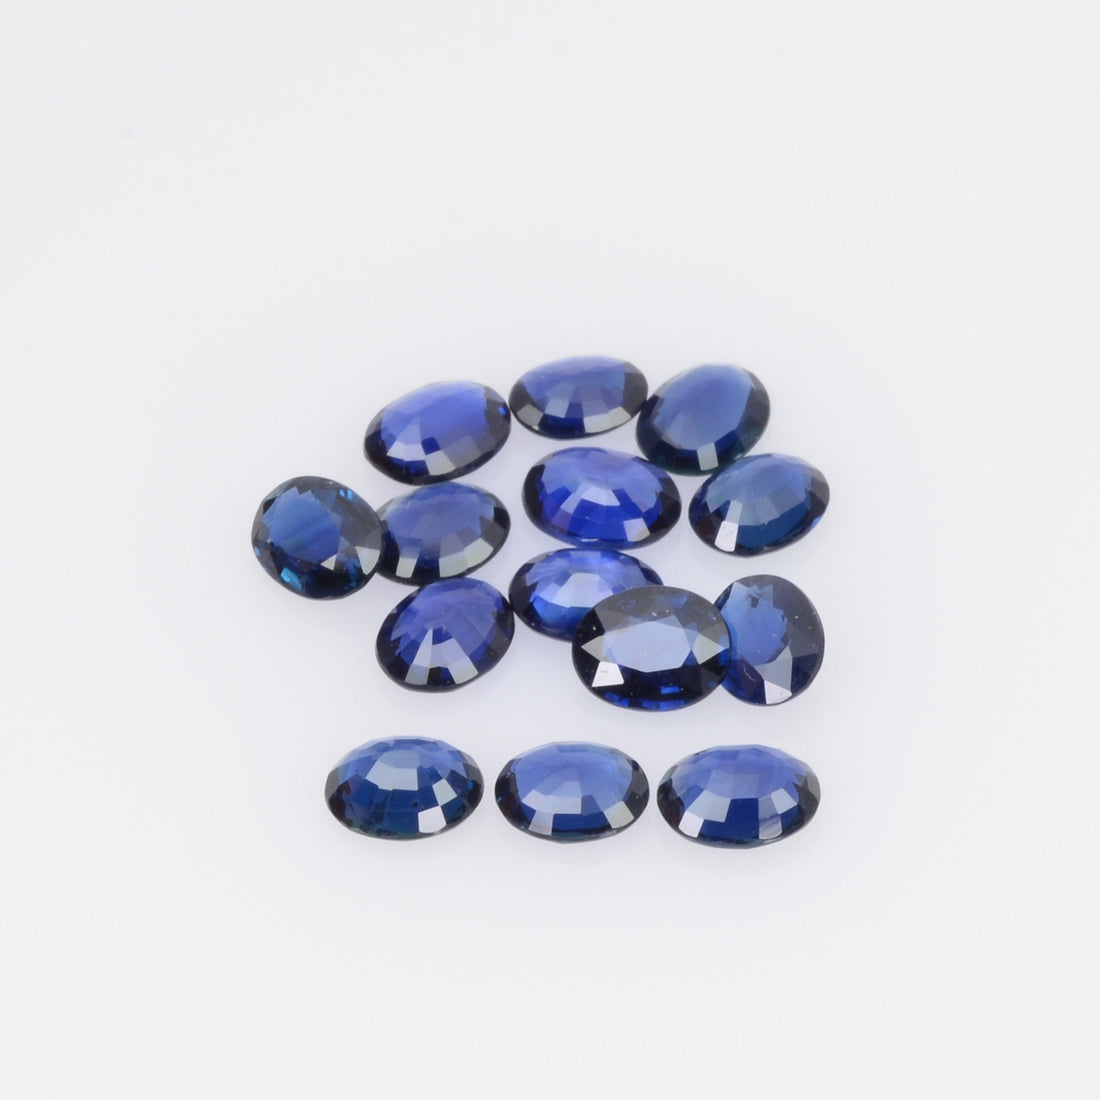 4.5x3.5 Natural Calibrated Blue Sapphire Loose Gemstone Oval Cut